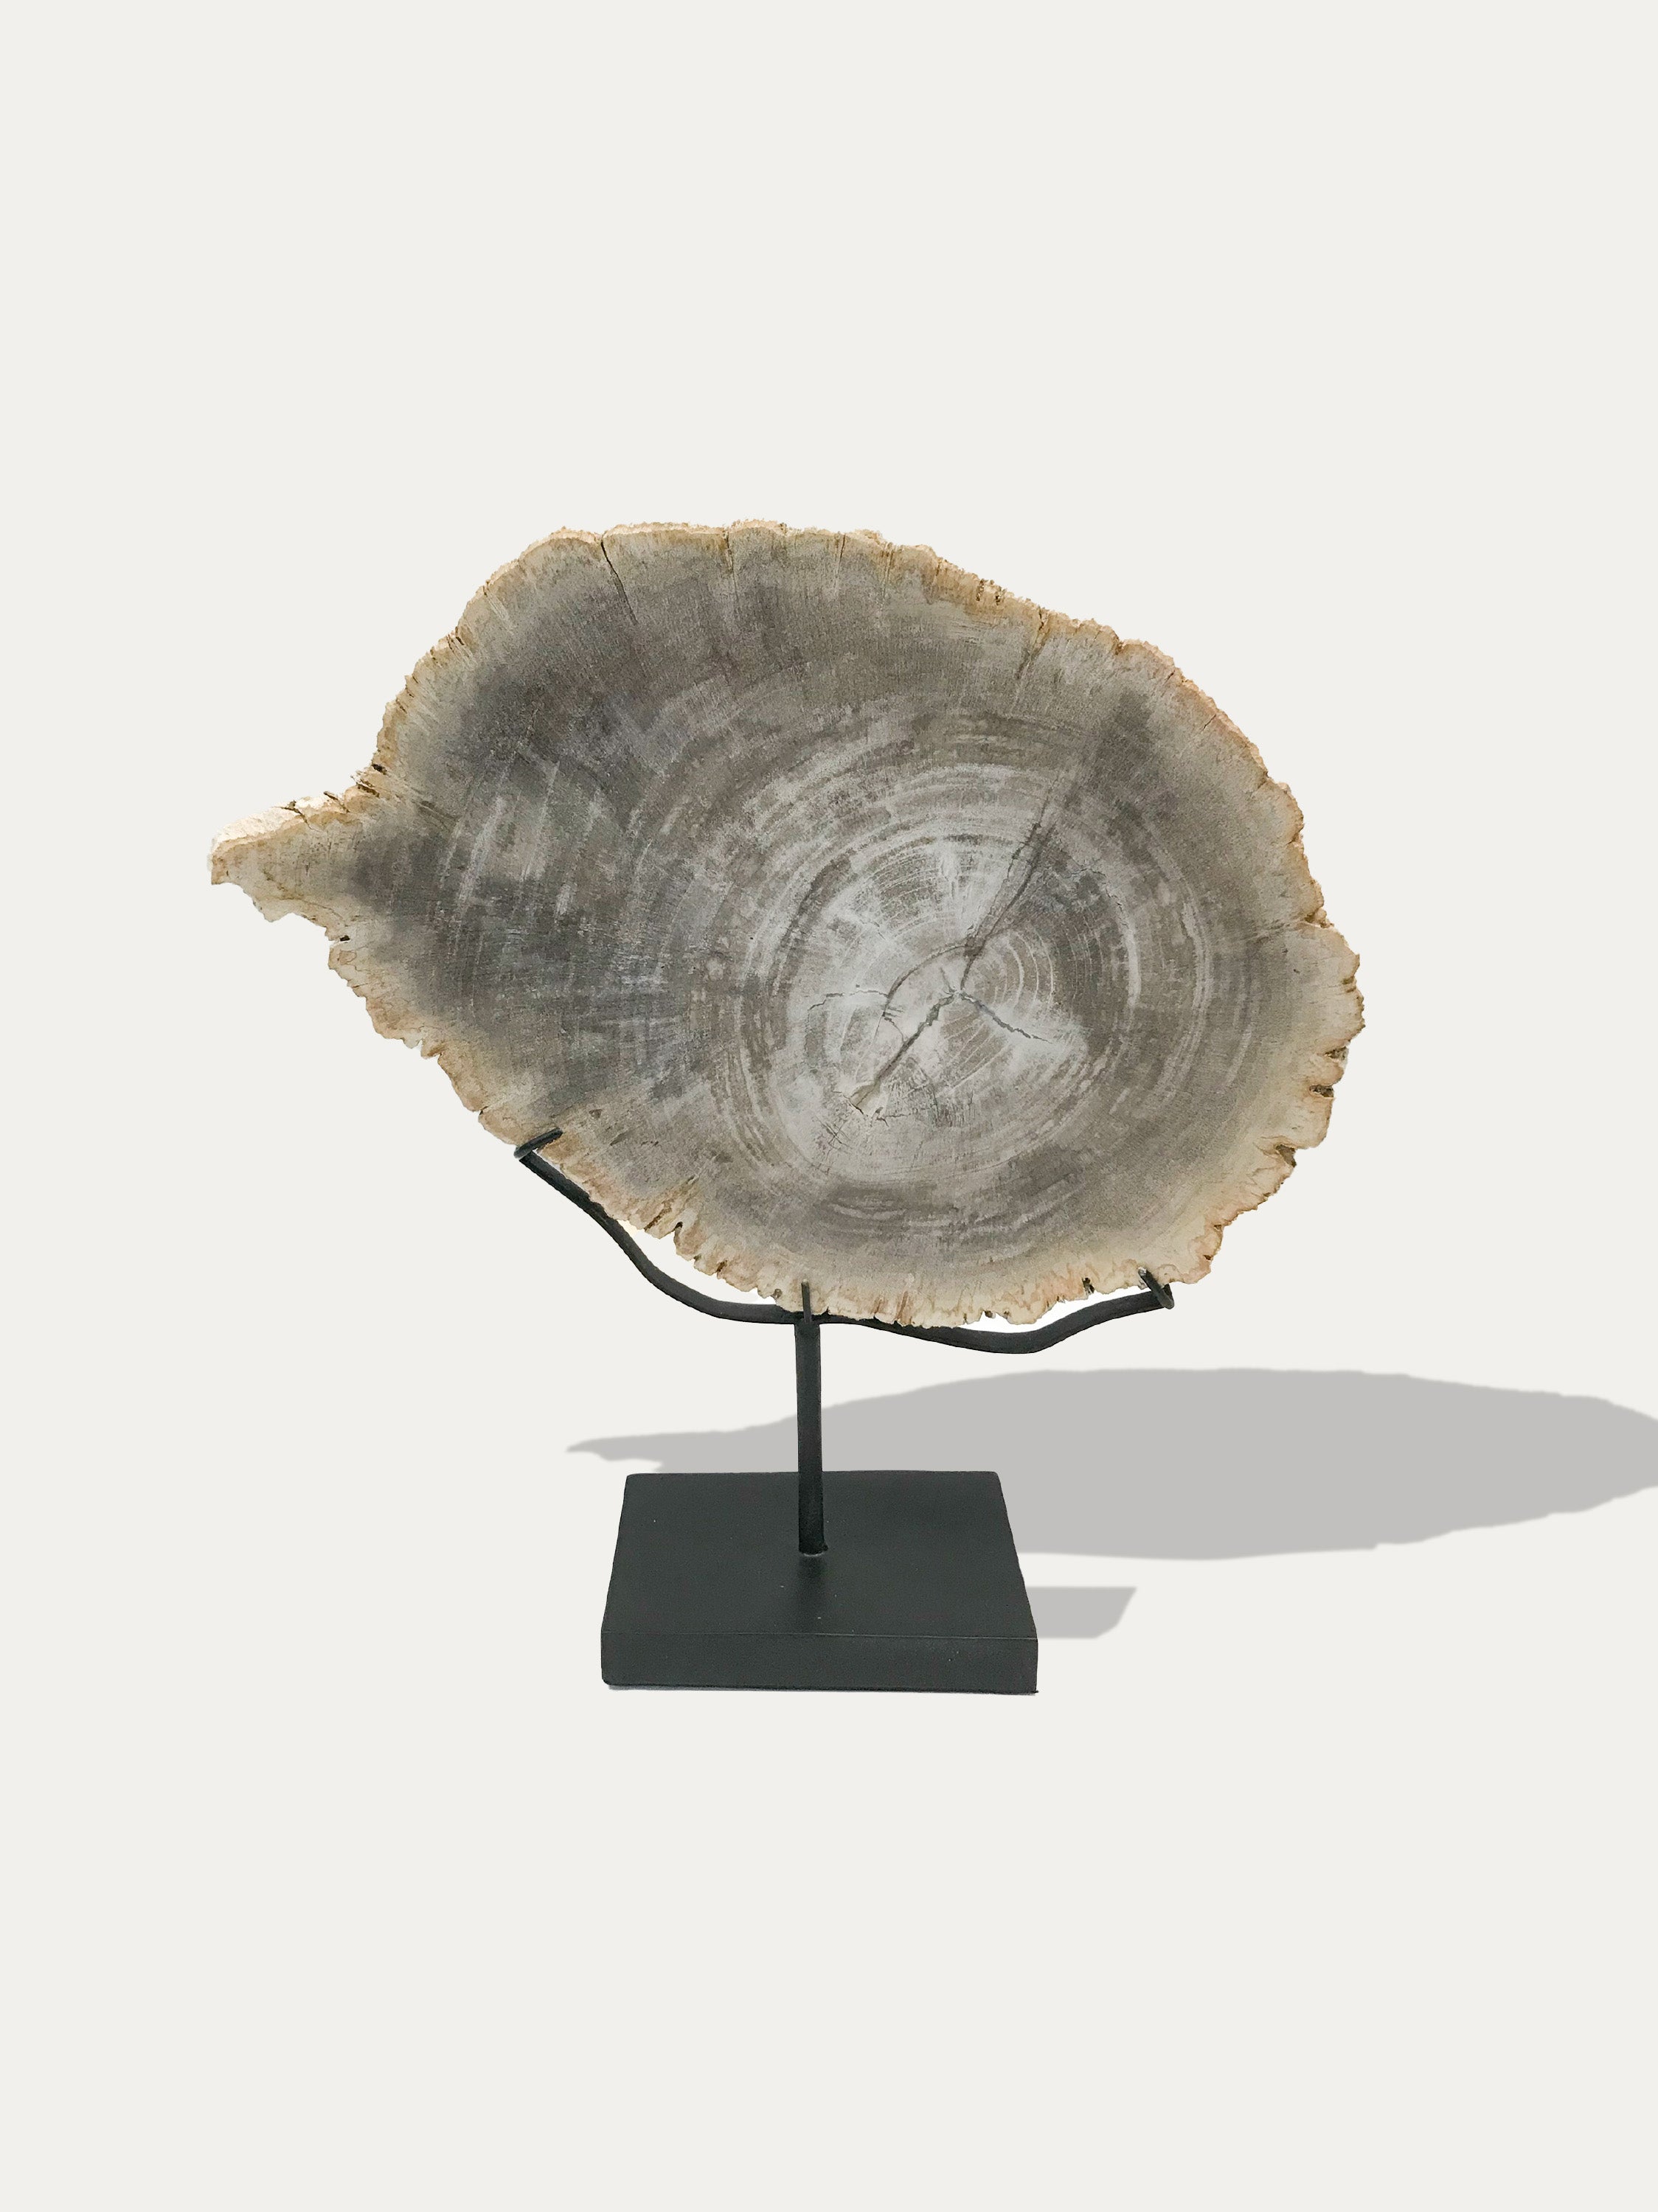 Petrified Wood Sculpture and Tray - Asian art from Kirschon